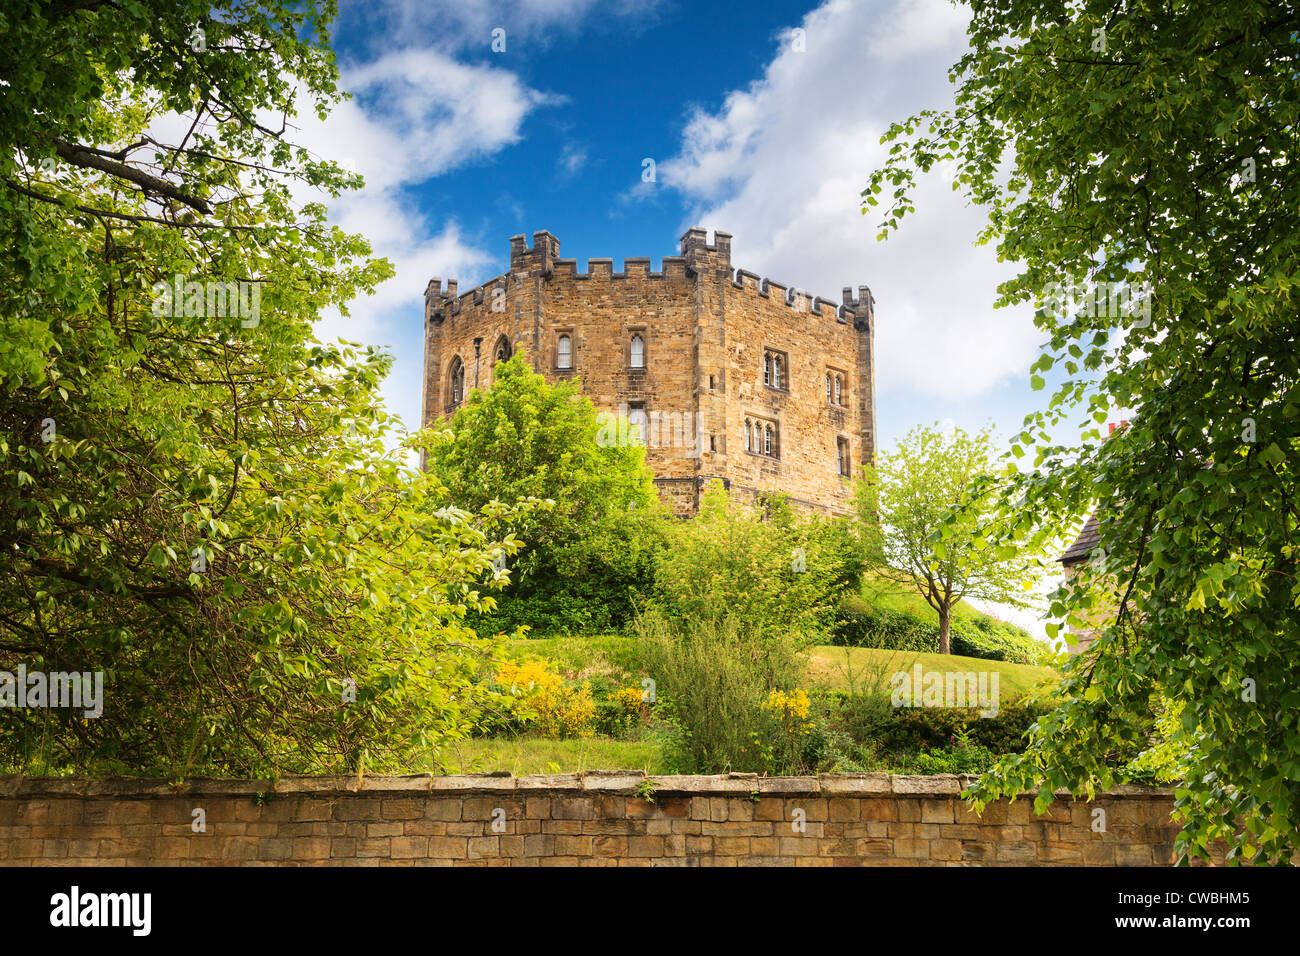 The keep of Durham Castle seen through trees. Stock Photo